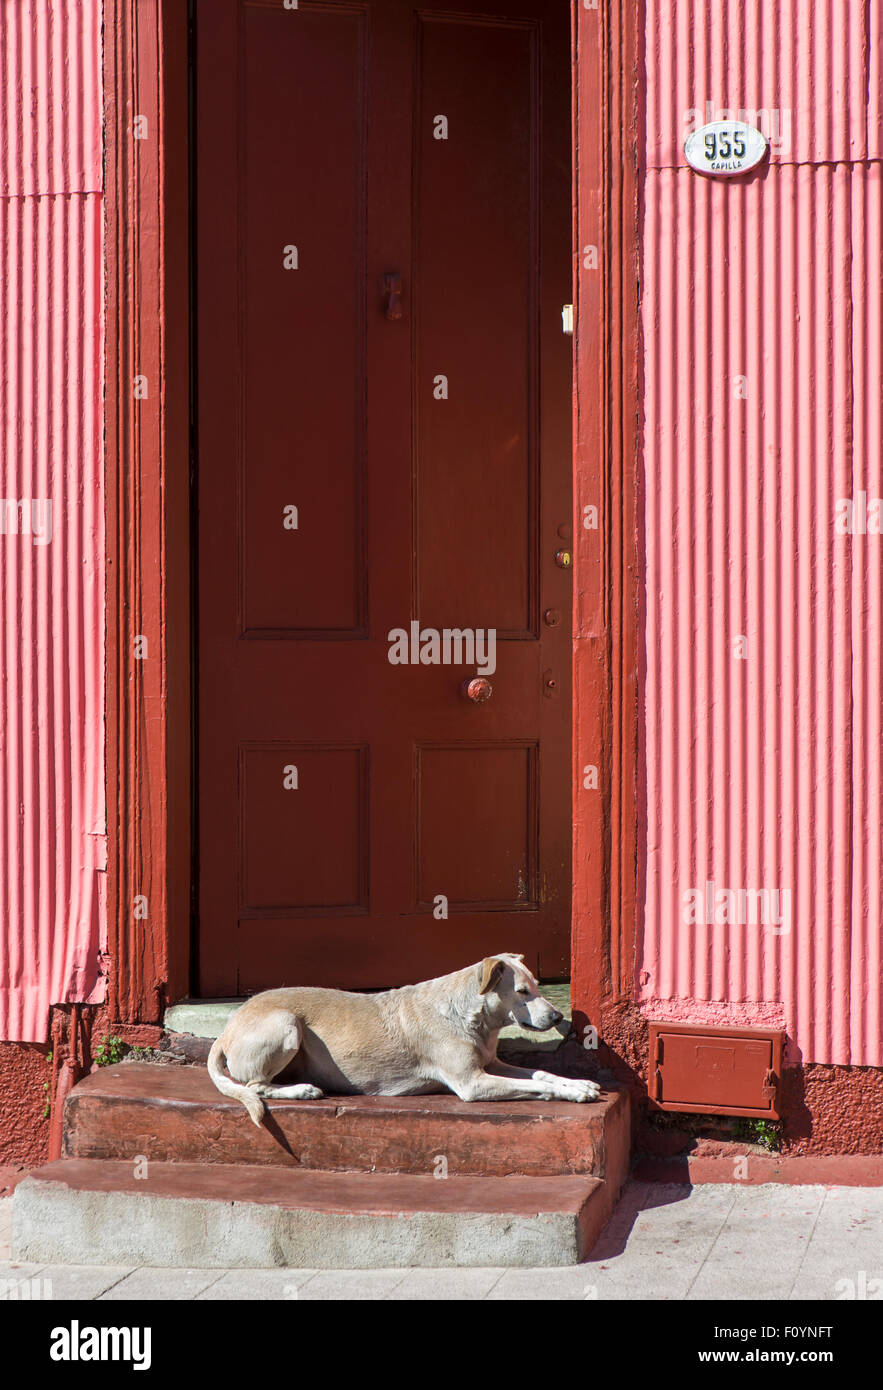 Dog in colorful doorway, Valparaiso, Chile Stock Photo